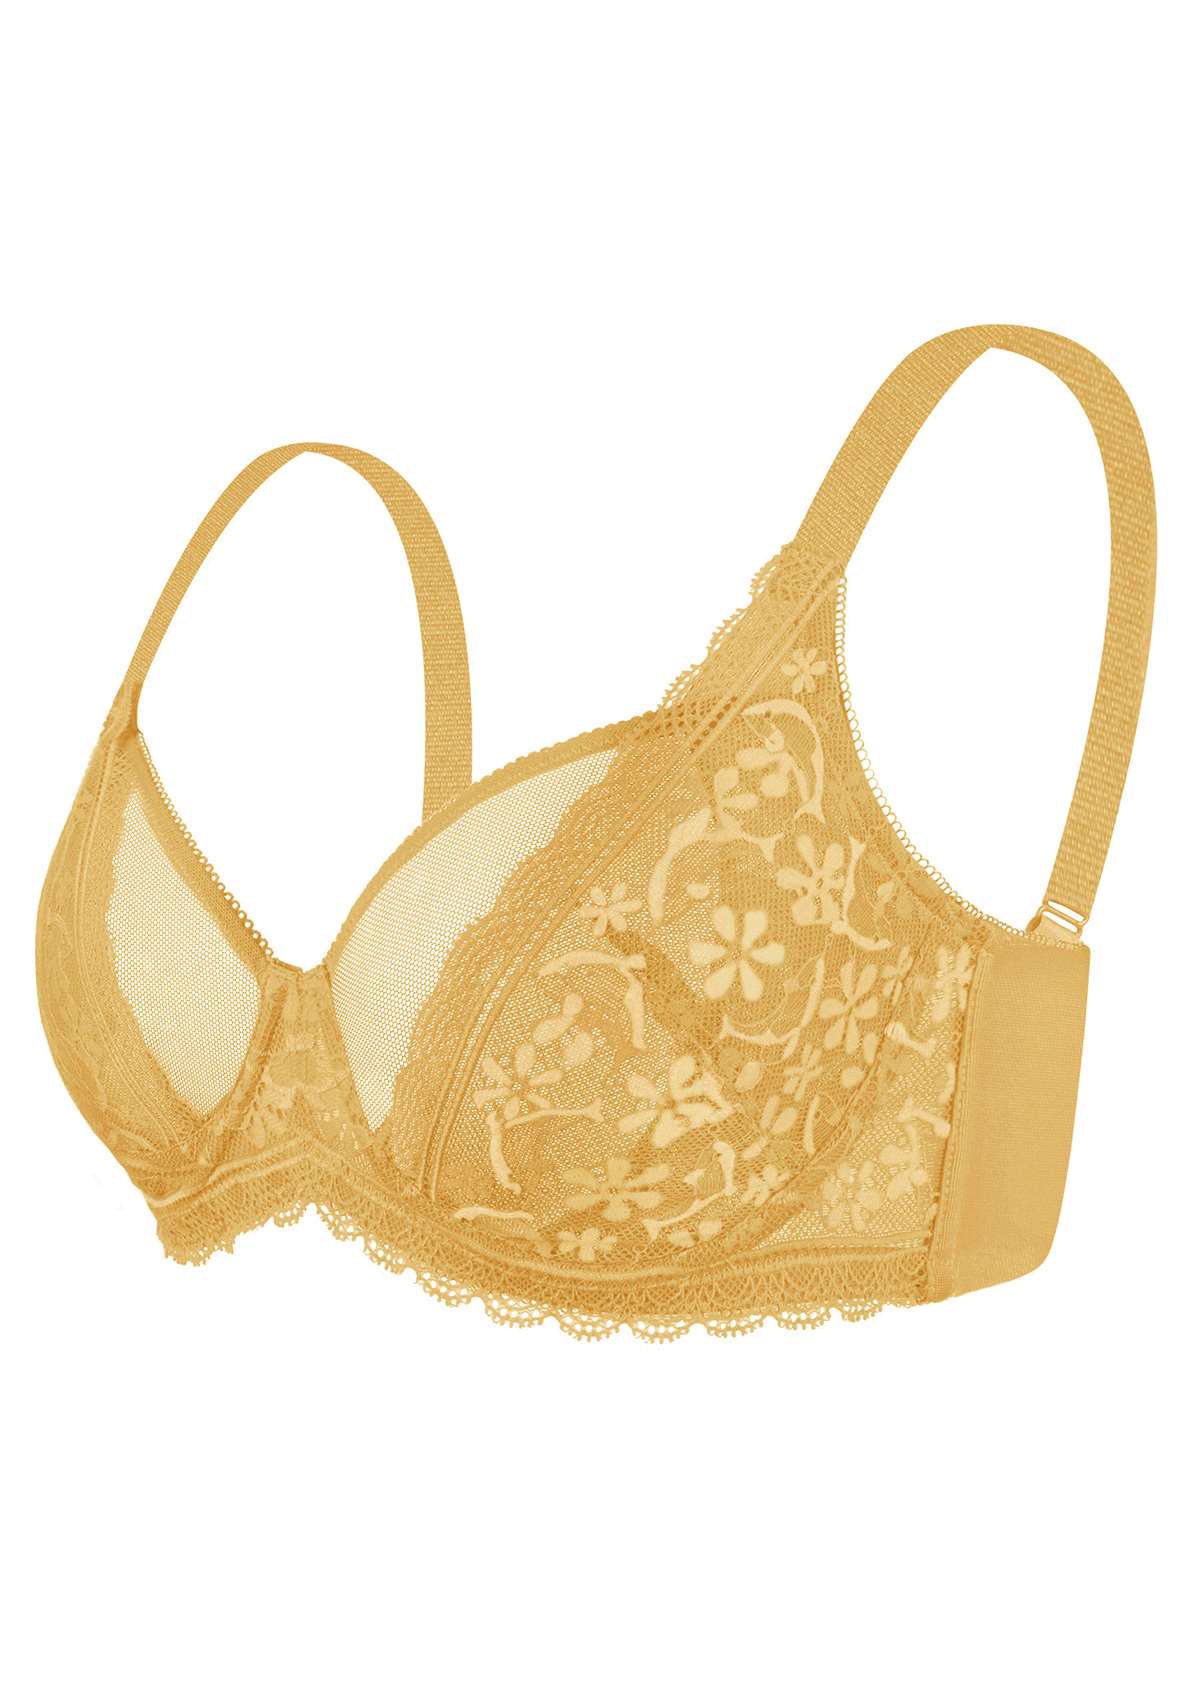 HSIA Anemone Lace Unlined Bra: Supportive, Lightweight Bra - Champagne / 36 / D